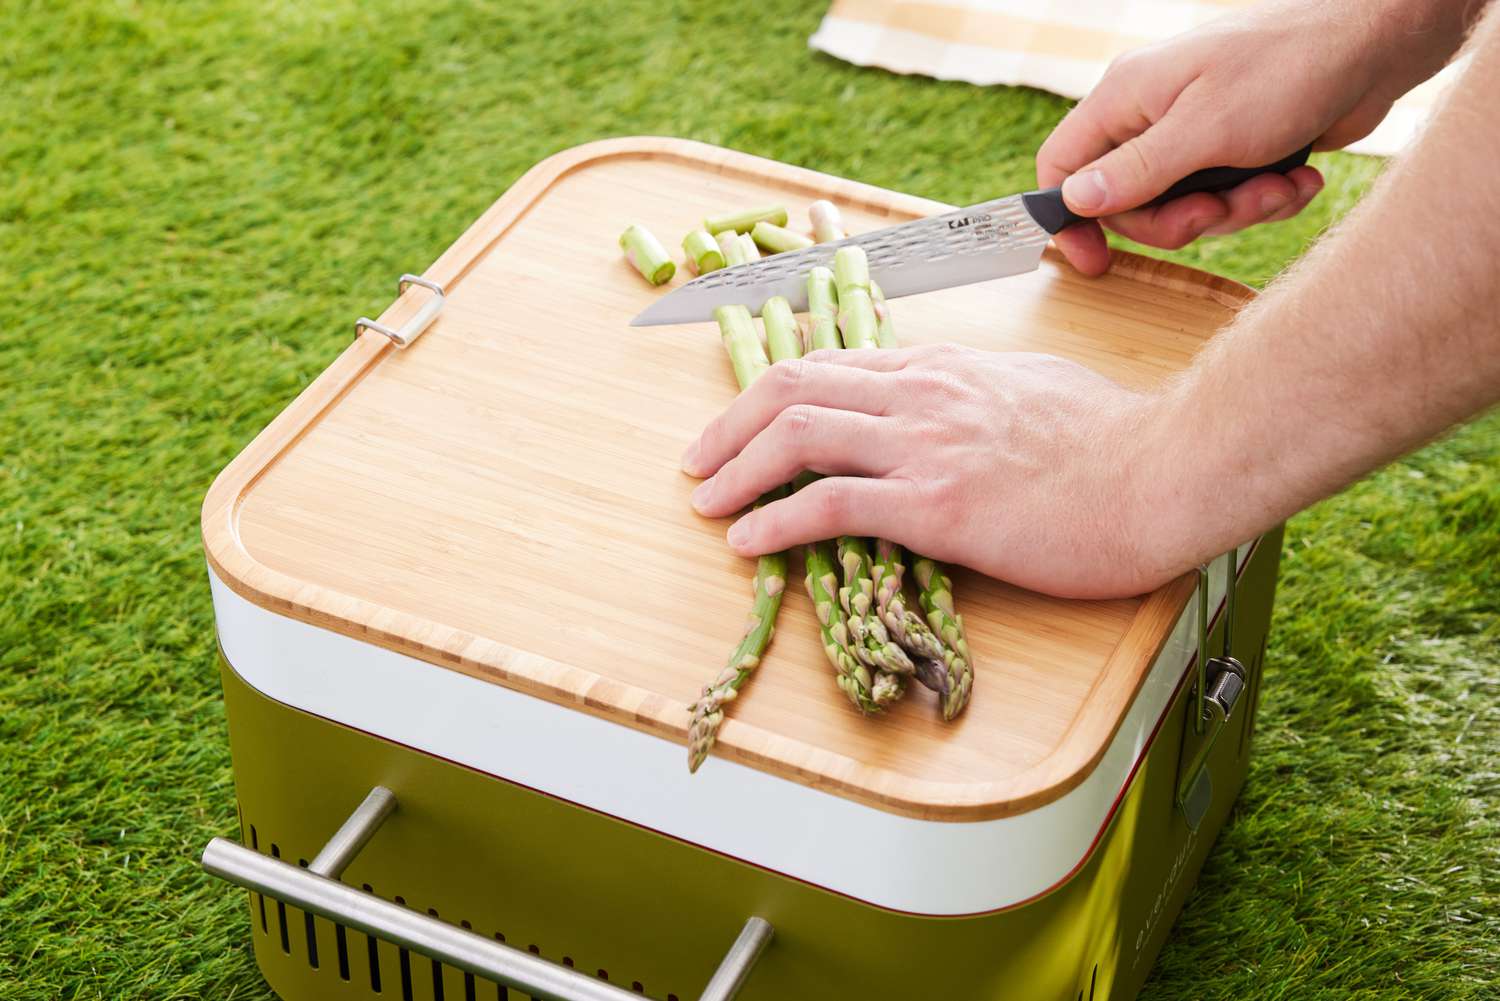 Hands chopping asparagus on a wooden cutting board on top of Everdure Cube Portable Charcoal Grill